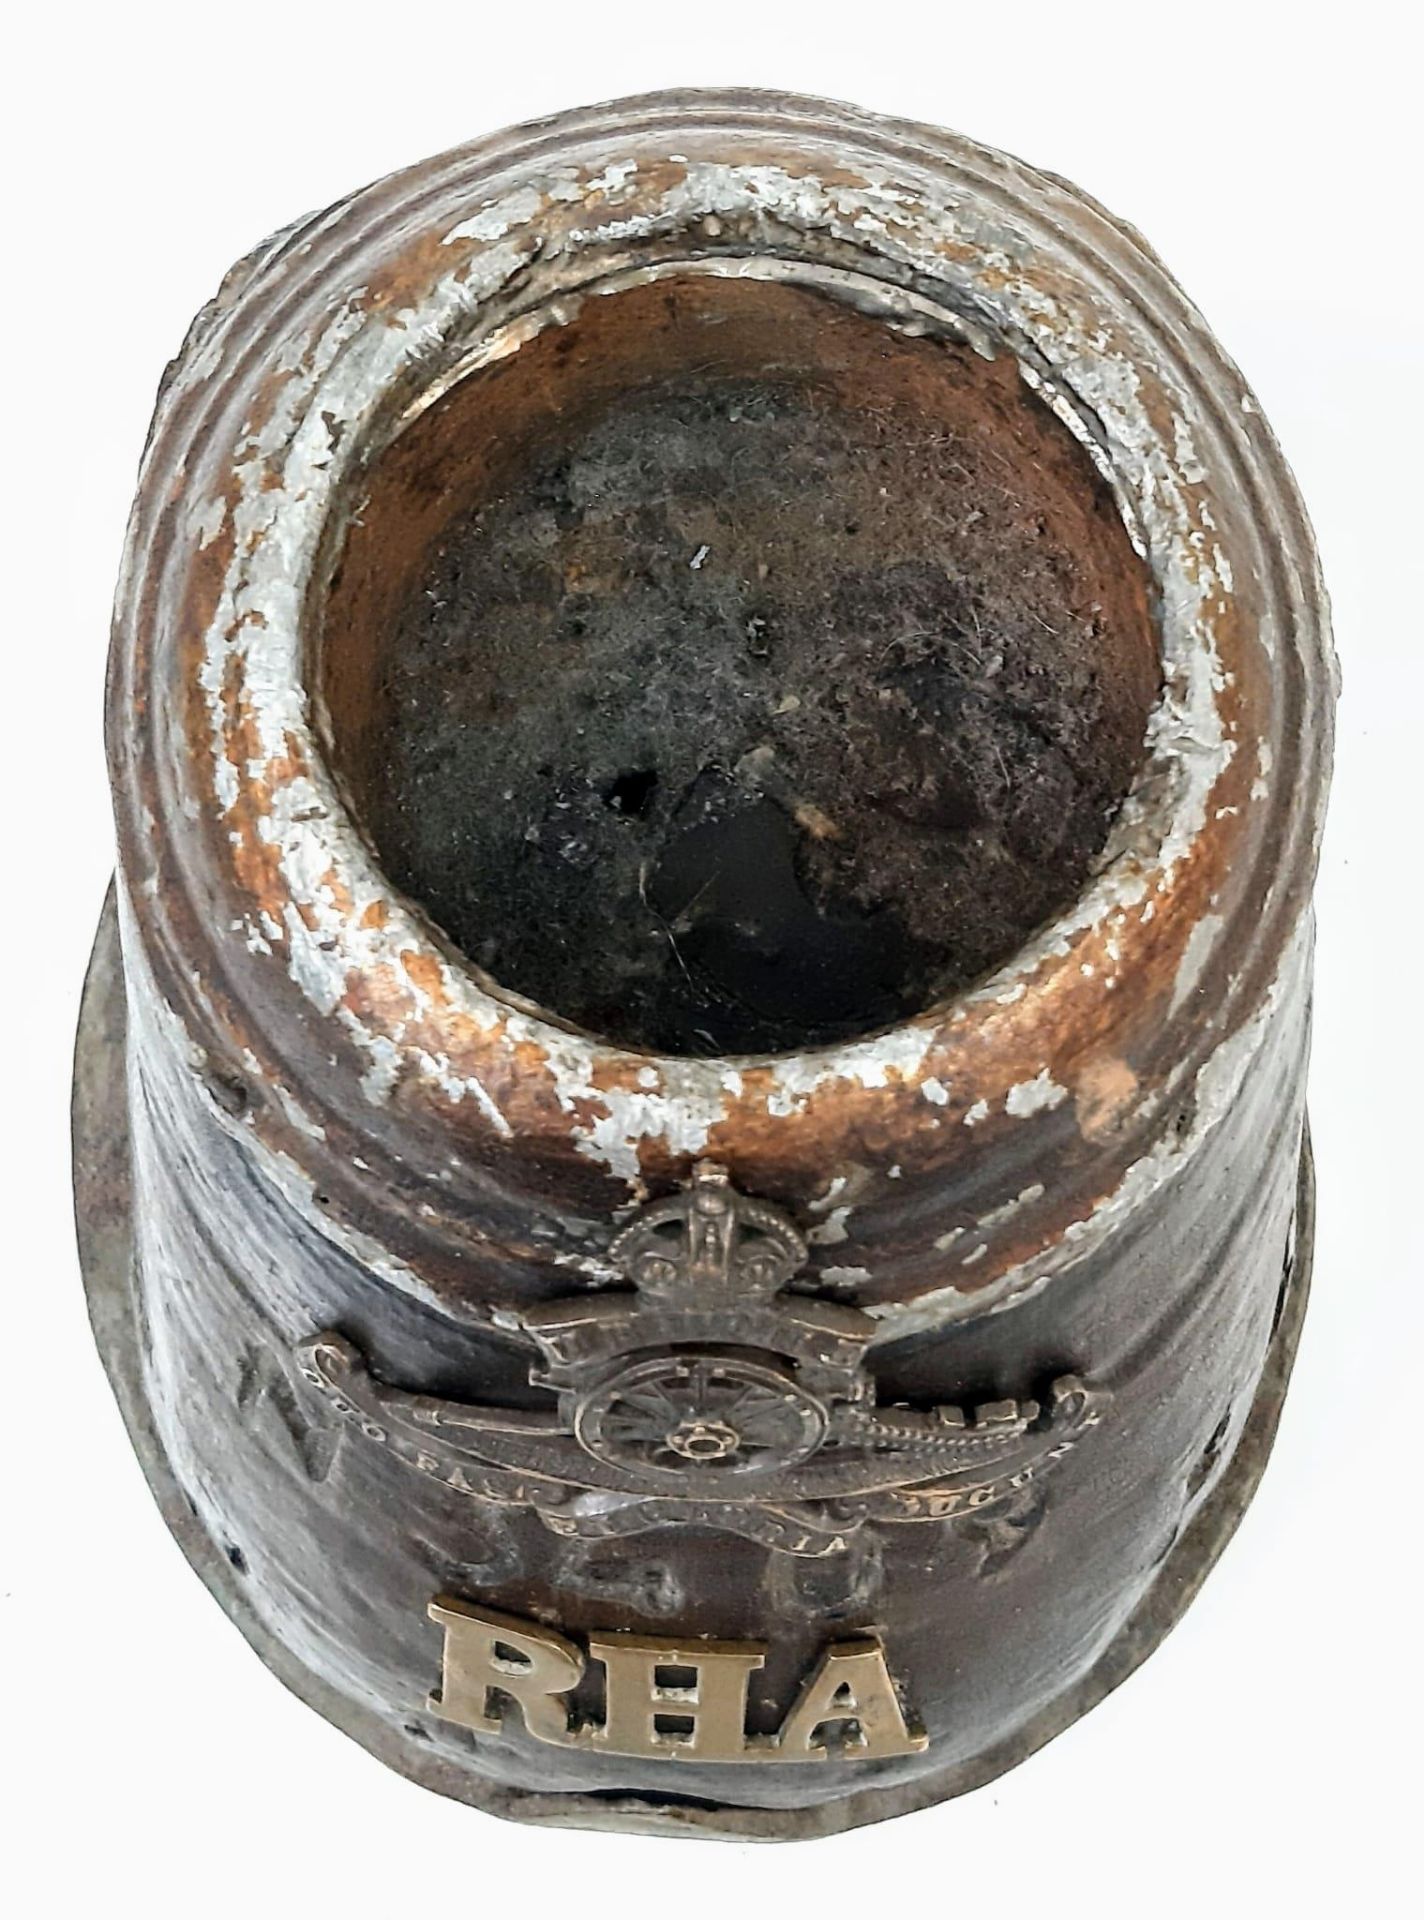 WW1 Trench Art Horse Hoof from a Horse in the Royal Horse Artillery during the First World War. - Image 6 of 6